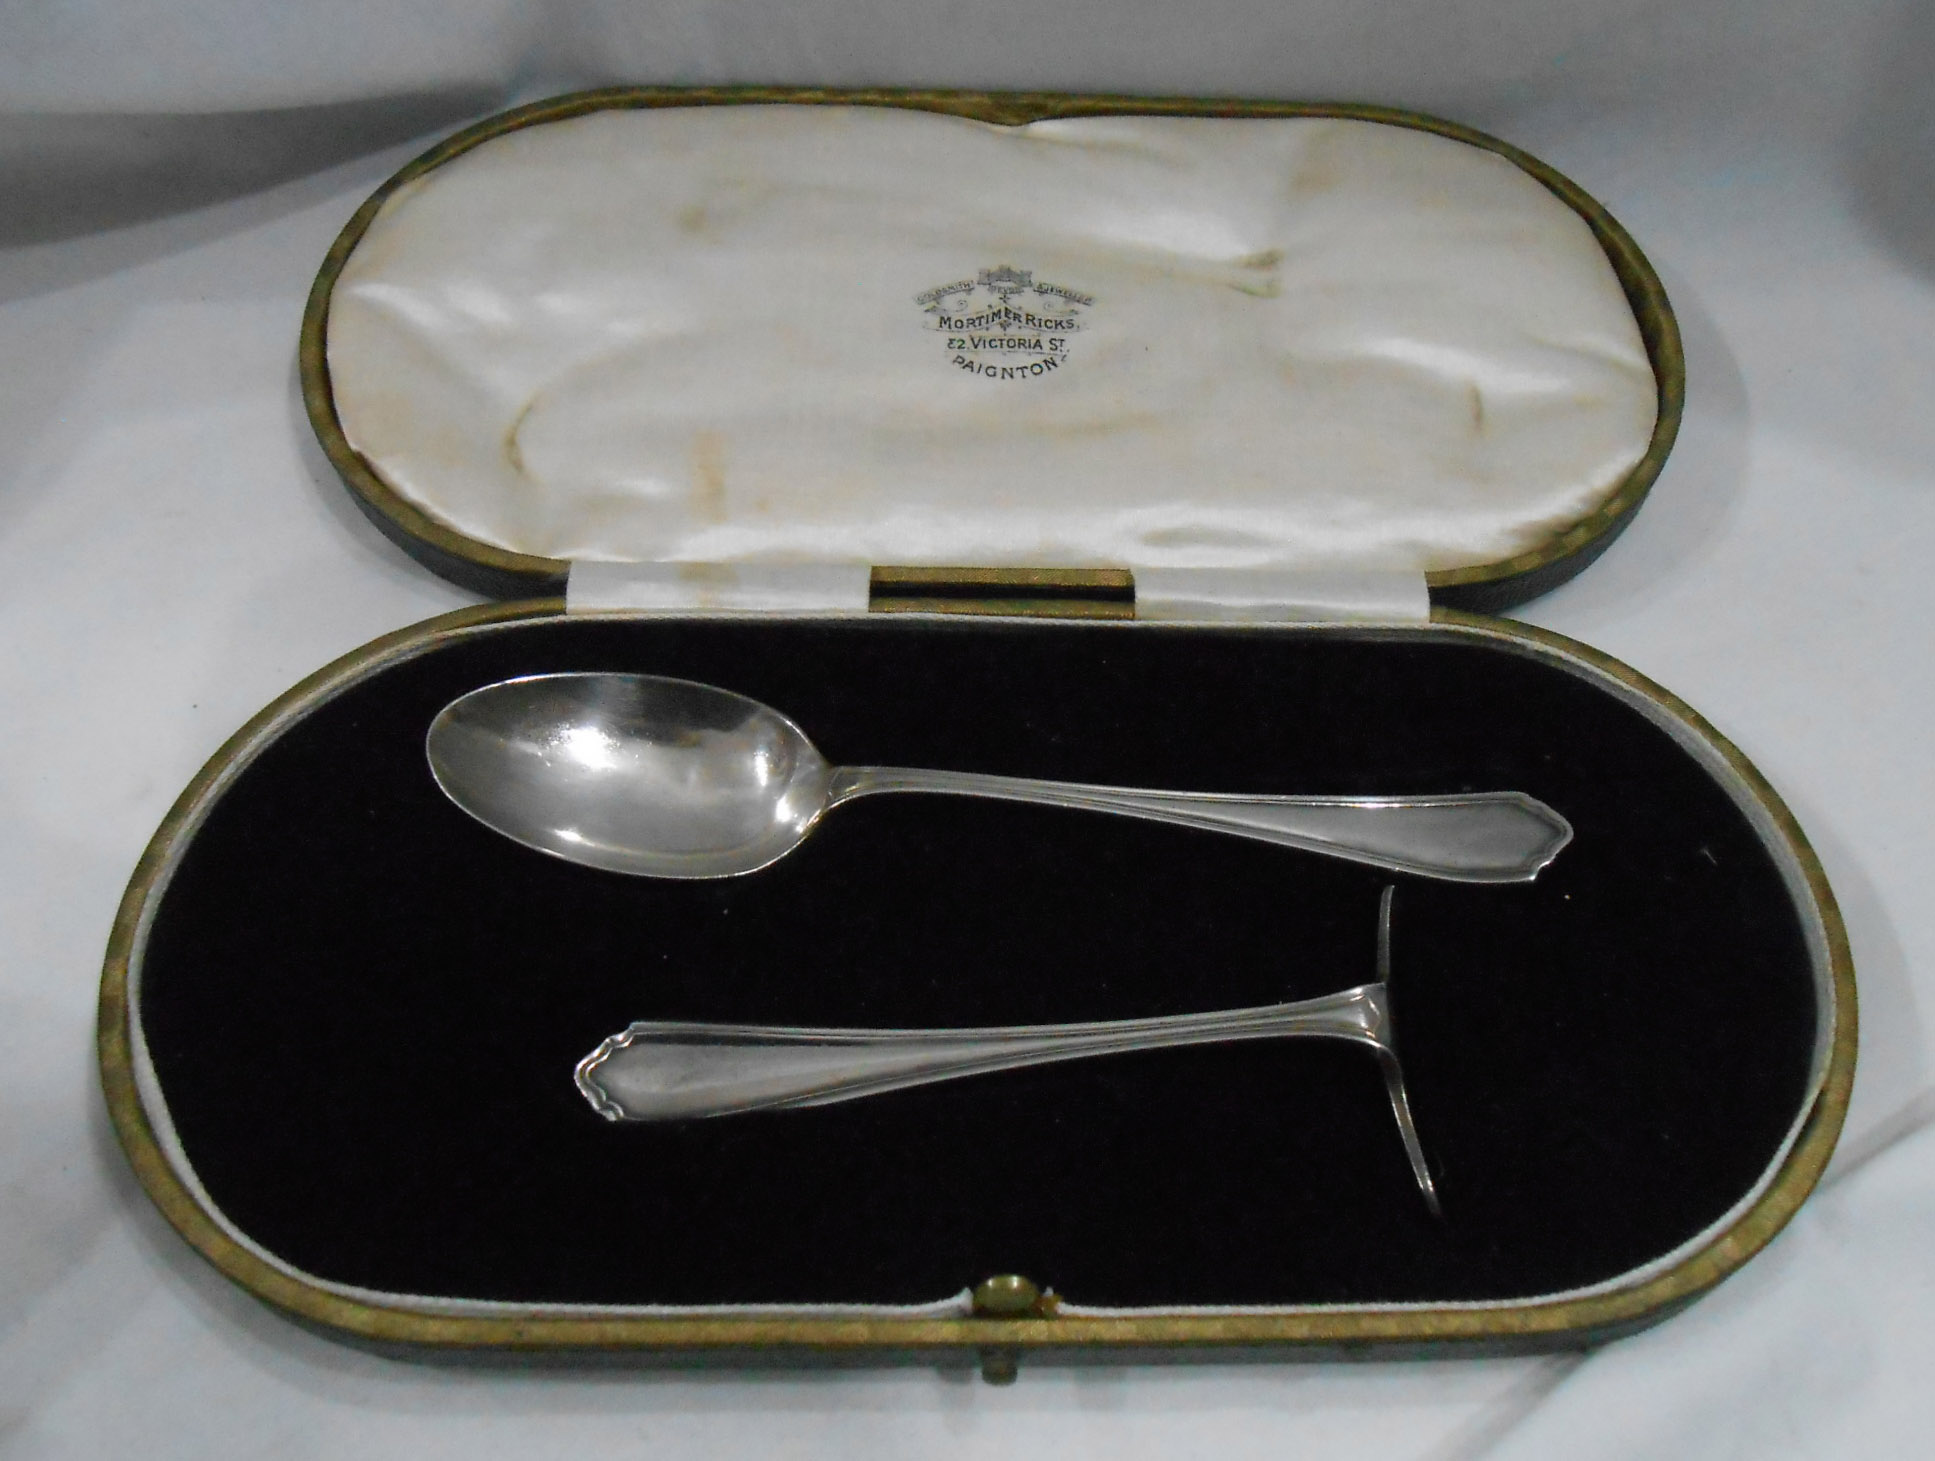 A cased Sheffield silver spoon and pusher in Mortimer Ricks, Victoria Street, Paignton retailers